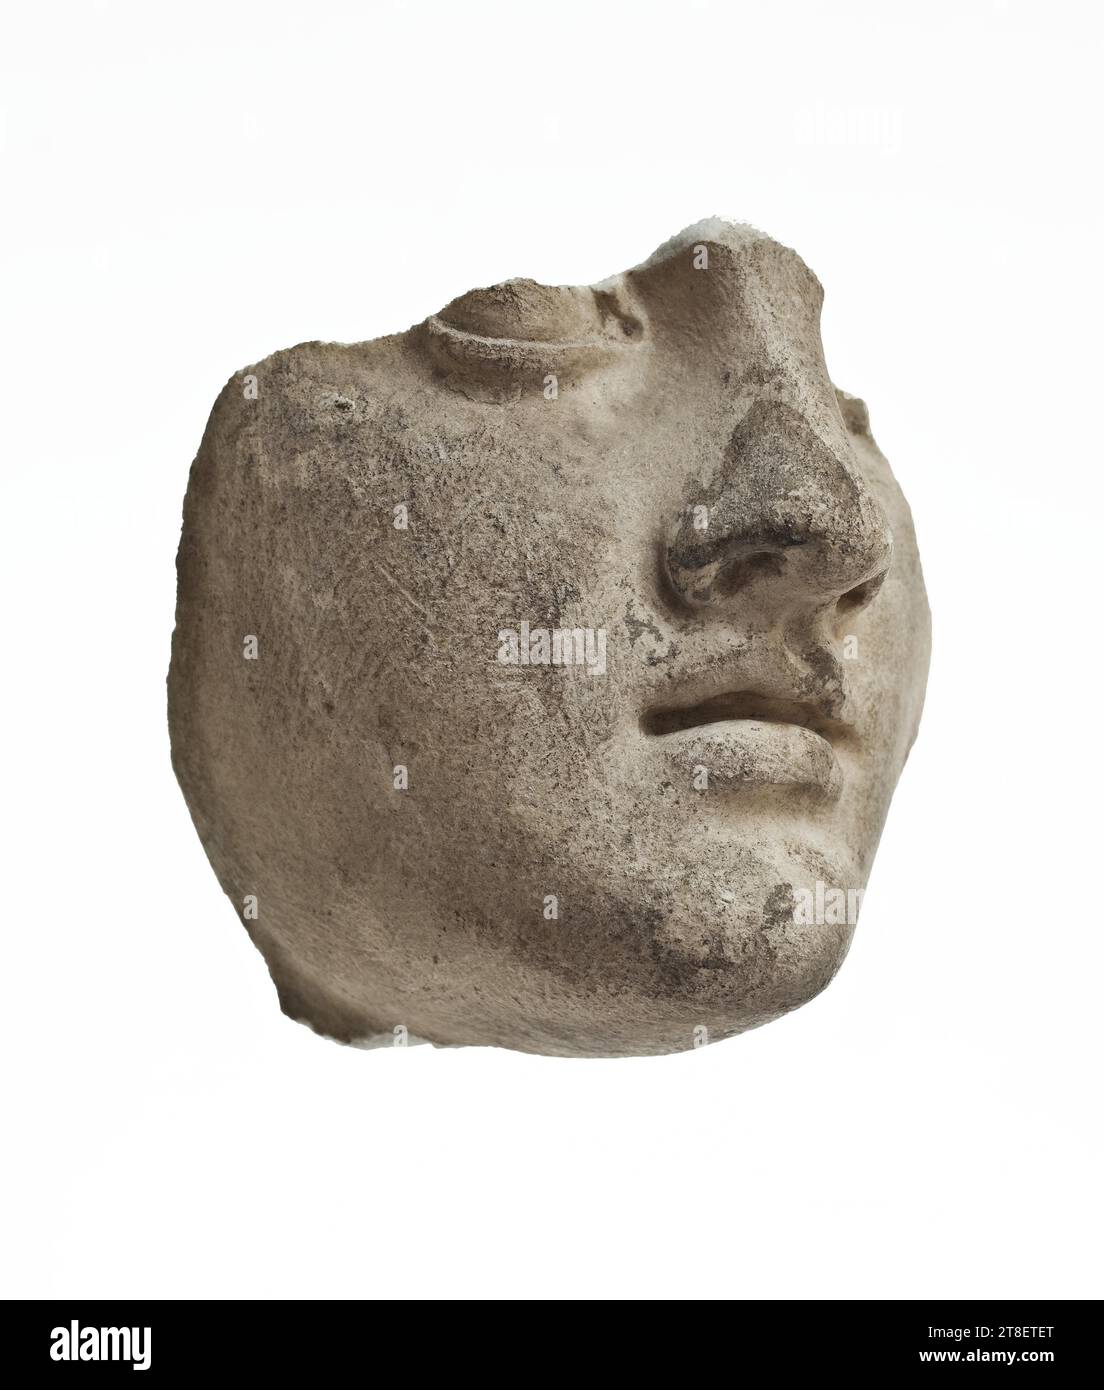 One of the sons of the Satrap Mazaeus, Bertel Thorvaldsen, 1770-1844, 1818 - 1838, Sculpture, Relief, This head is a fragment from Thorvaldsen’s frieze, Alexander the Great’s Triumphal Entry into Babylon. It represents one of the sons of the Babylonian provincial governor Mazæus'. The heads on the frieze were originally in the room alongside the Great Hall of Christiansborg Palace until the palace was destroyed by fire in 1884., Carved, Height 7.8 cm, Width 6.7 cm, Sculpture, European, Modernity (1800 - 1914 Stock Photo